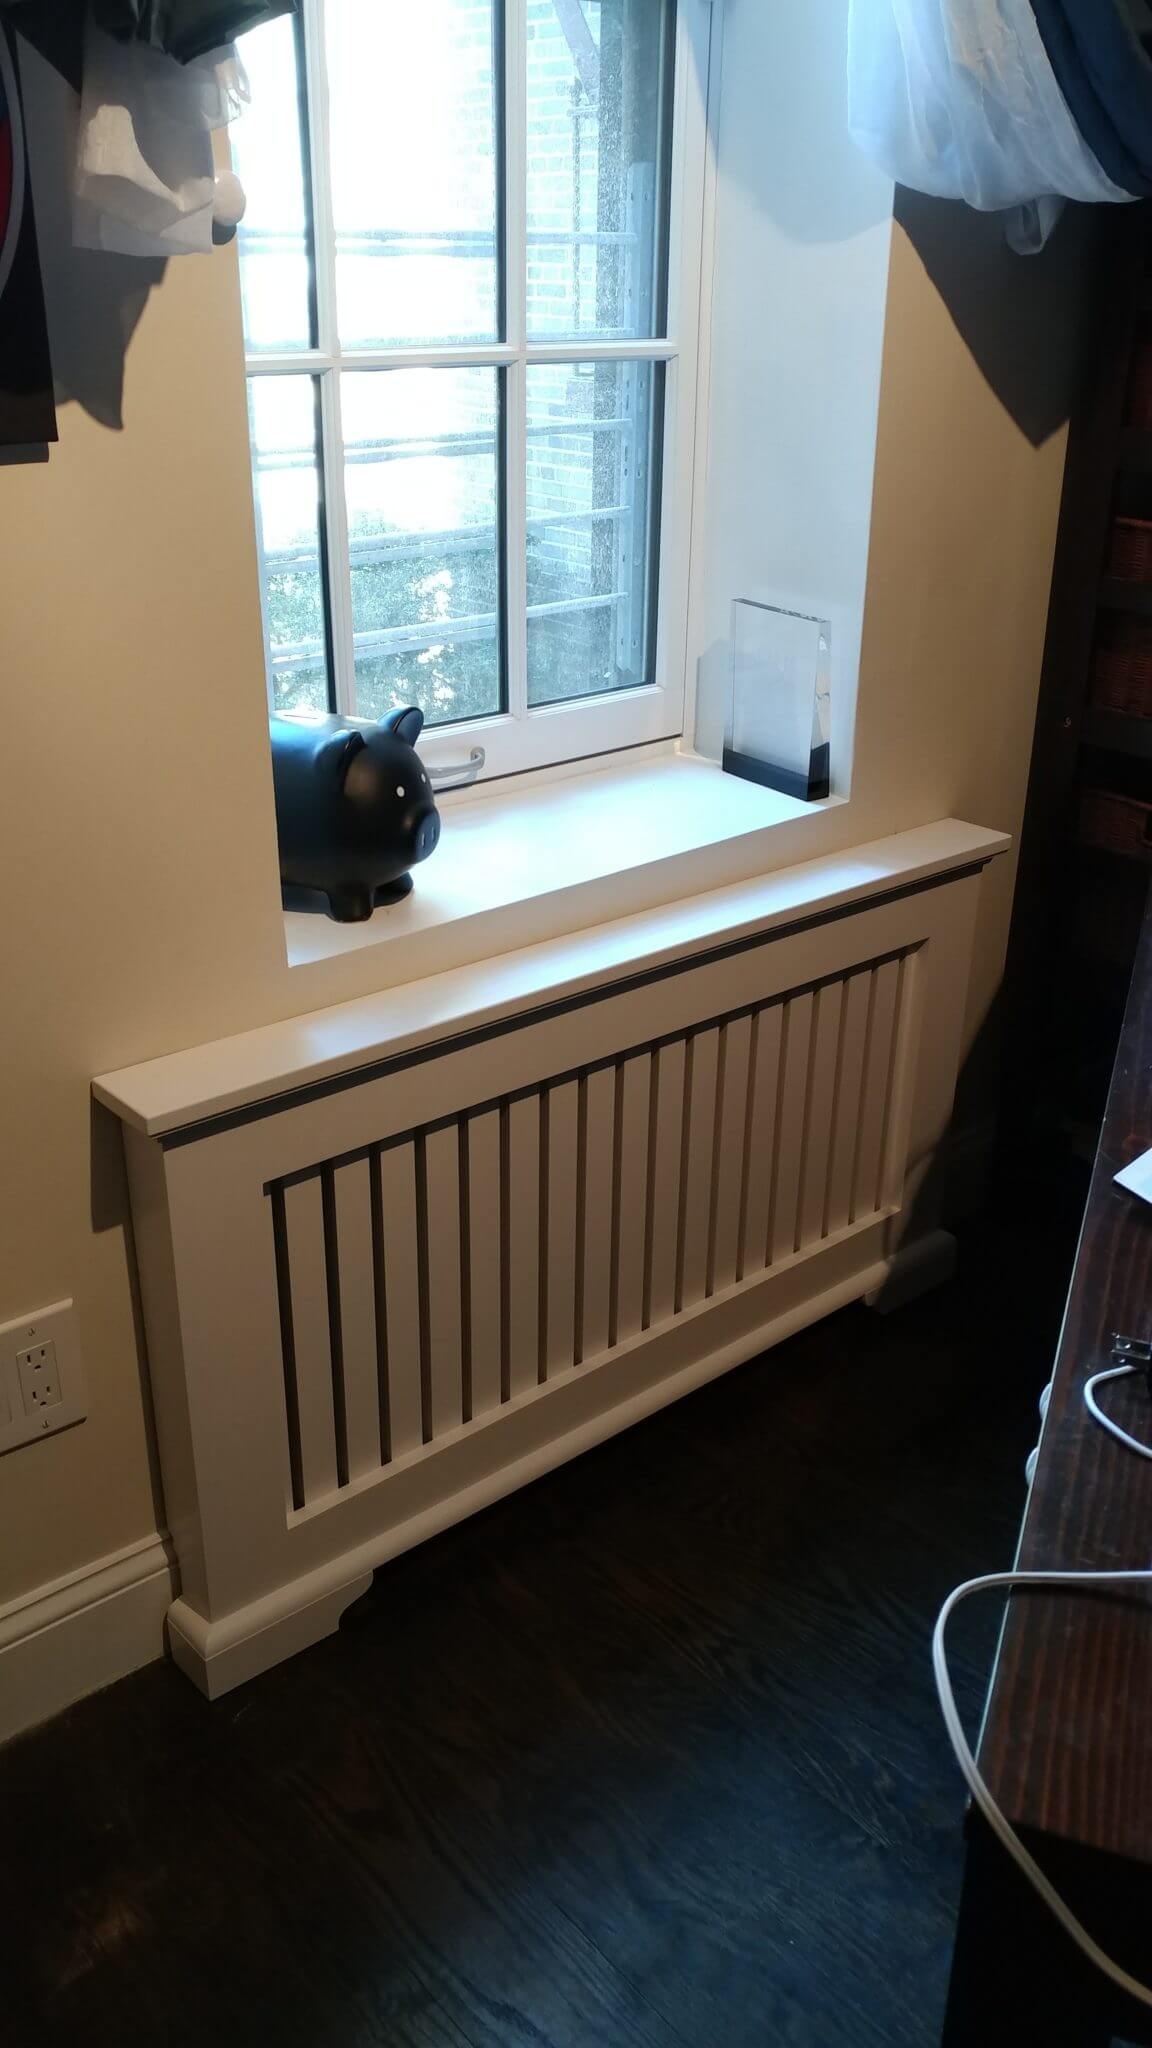 Wood radiator cover in white with flush installation under a window.